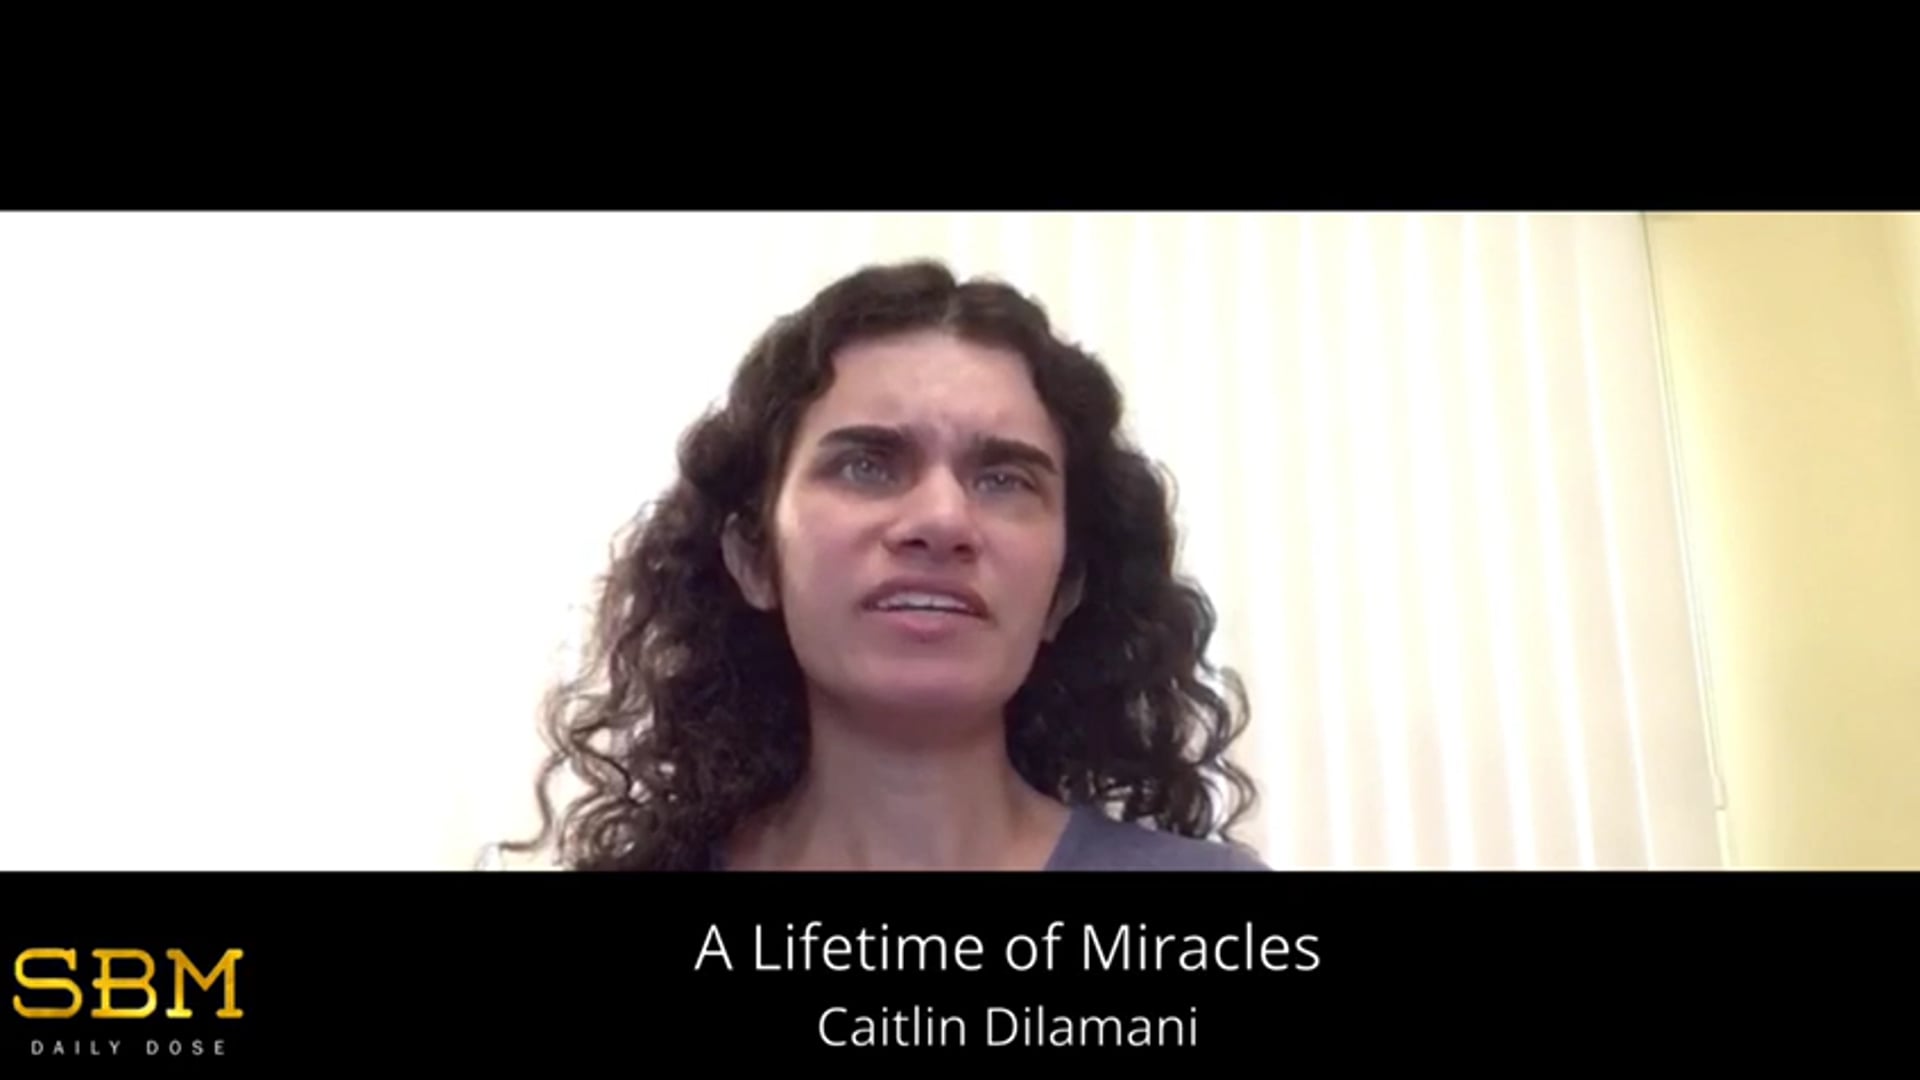 A Lifetime of Miracles - Caitlin Dilamani